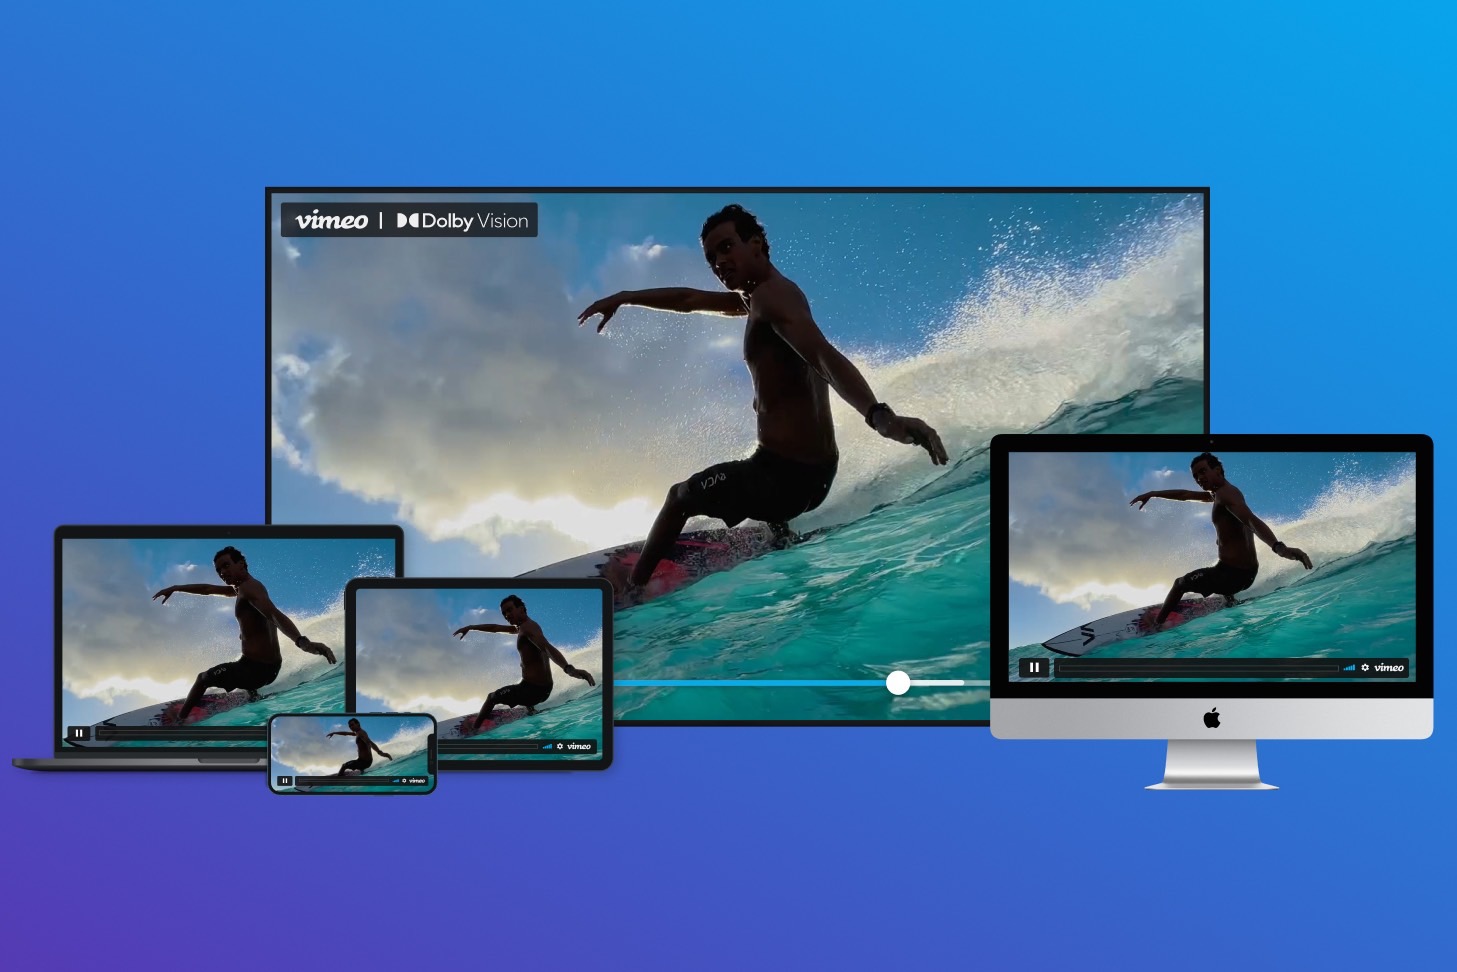 Vimeo Adds Vision Support, But Only For Apple | Digital Trends